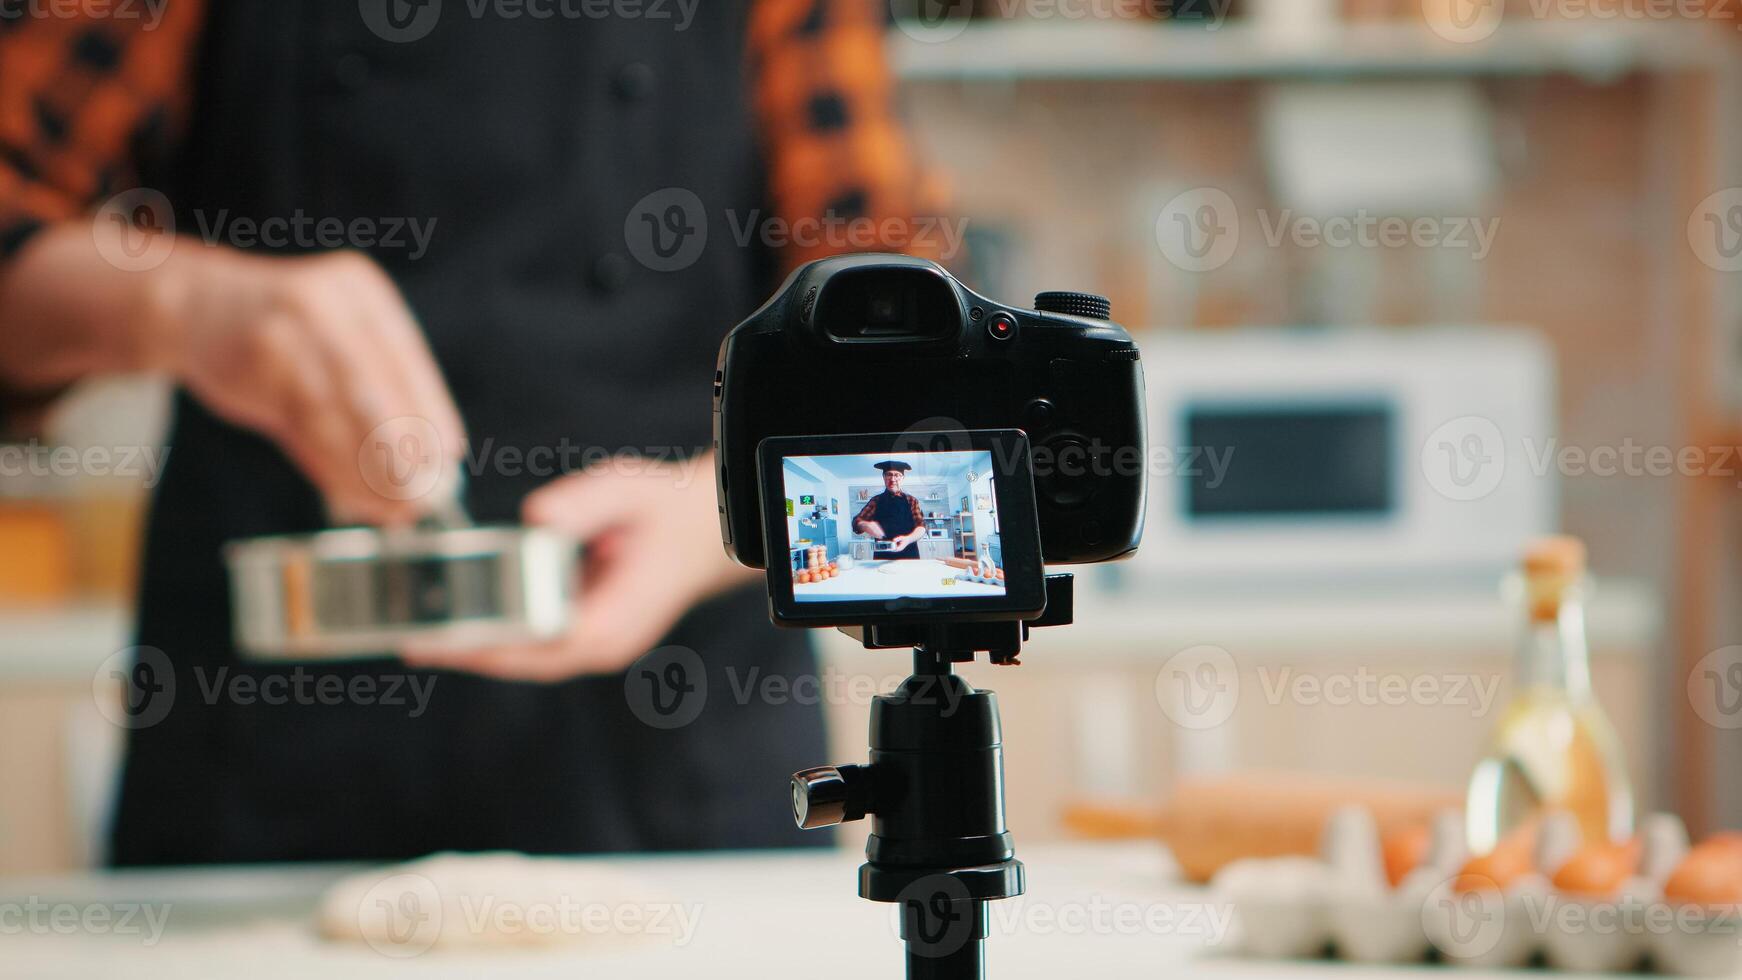 Close up of a video camera filming senior smiling man blogger in kitchen cooking. Retired blogger chef influencer using internet technology communicating on social media with digital equipment photo